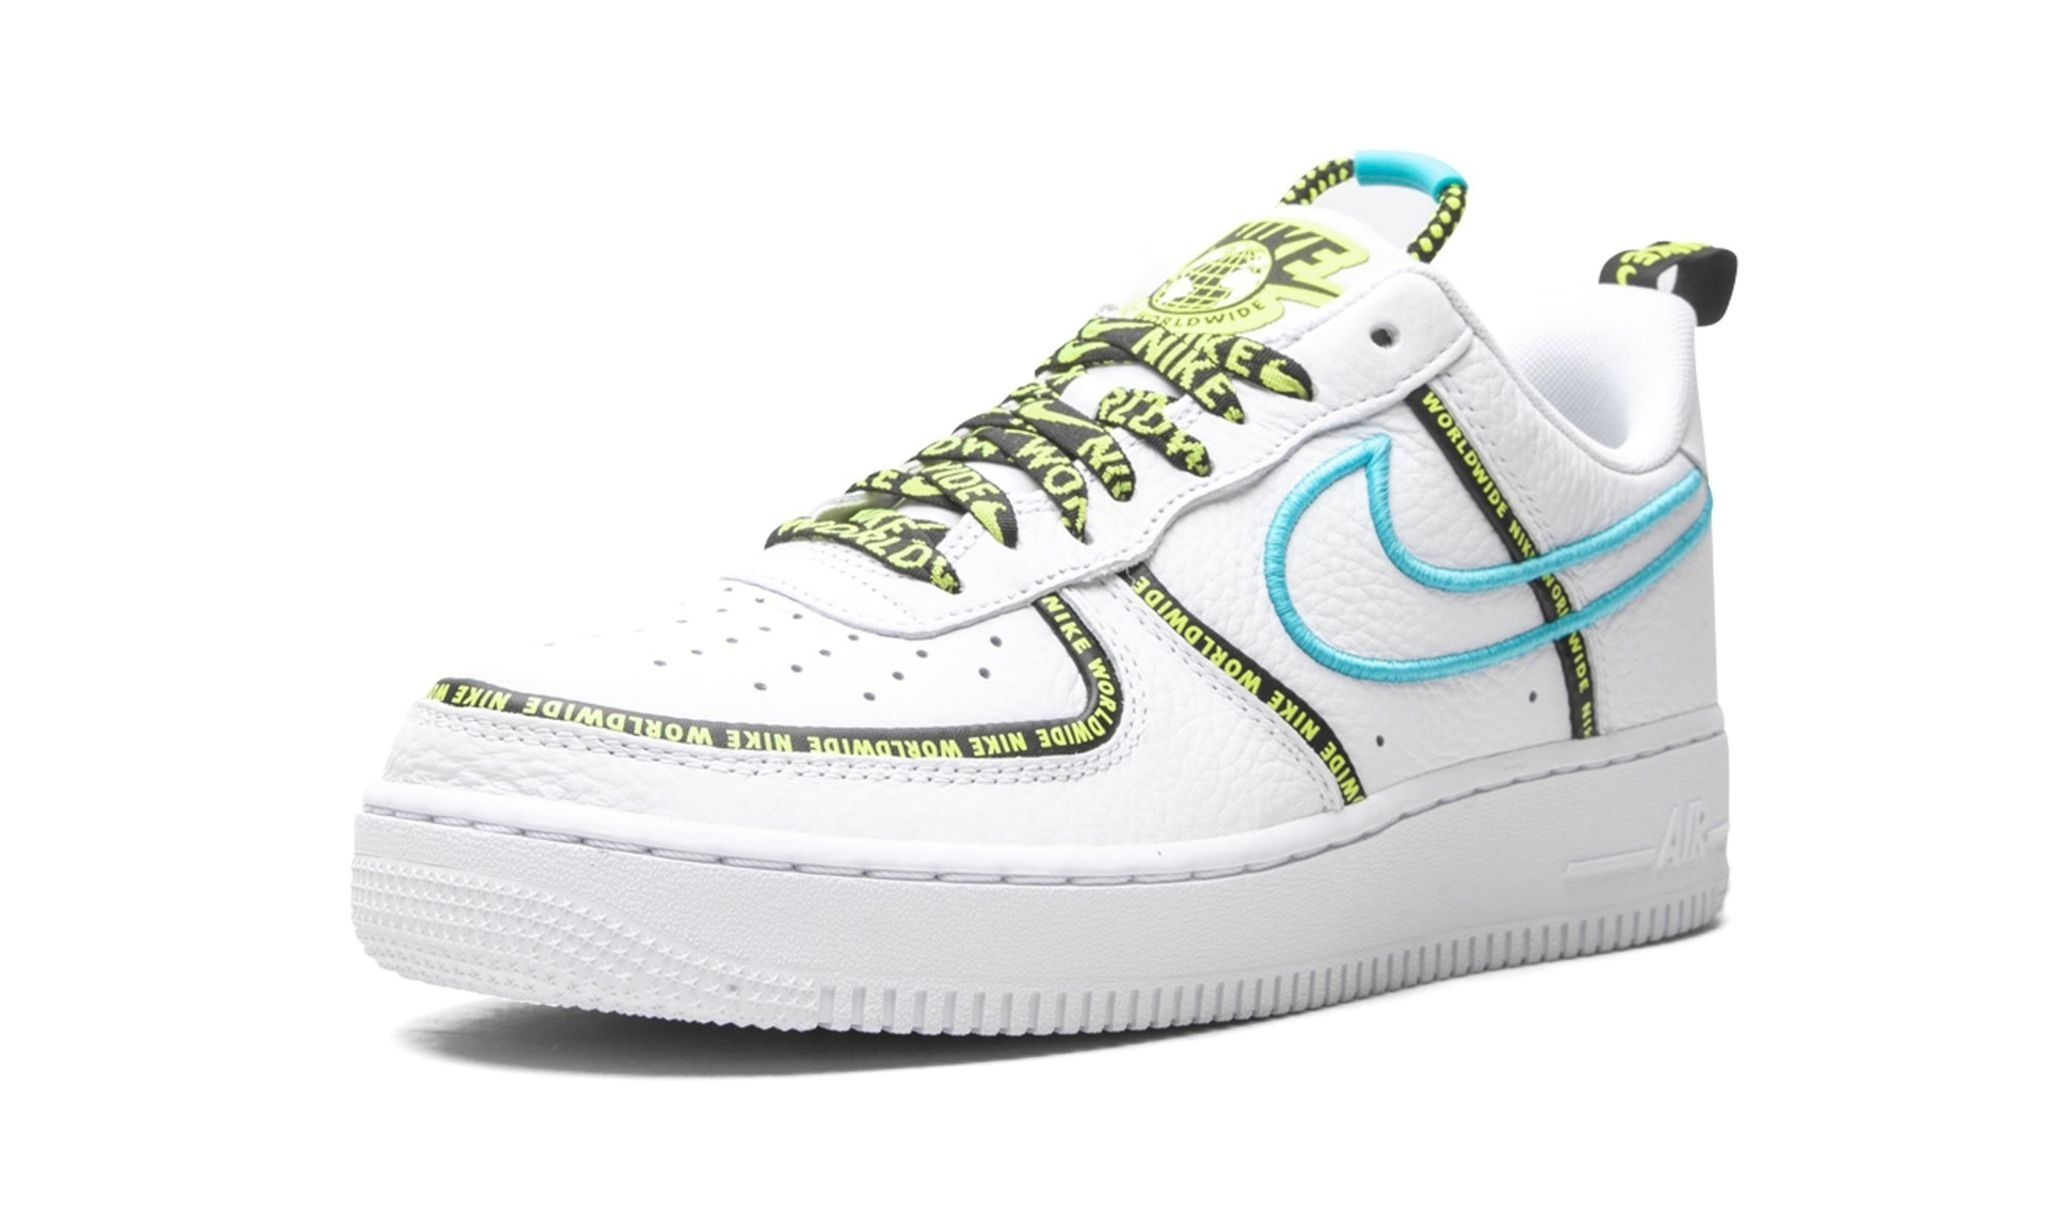 Air Force 1 Low "Worldwide White Blue Fury Volt" - 4